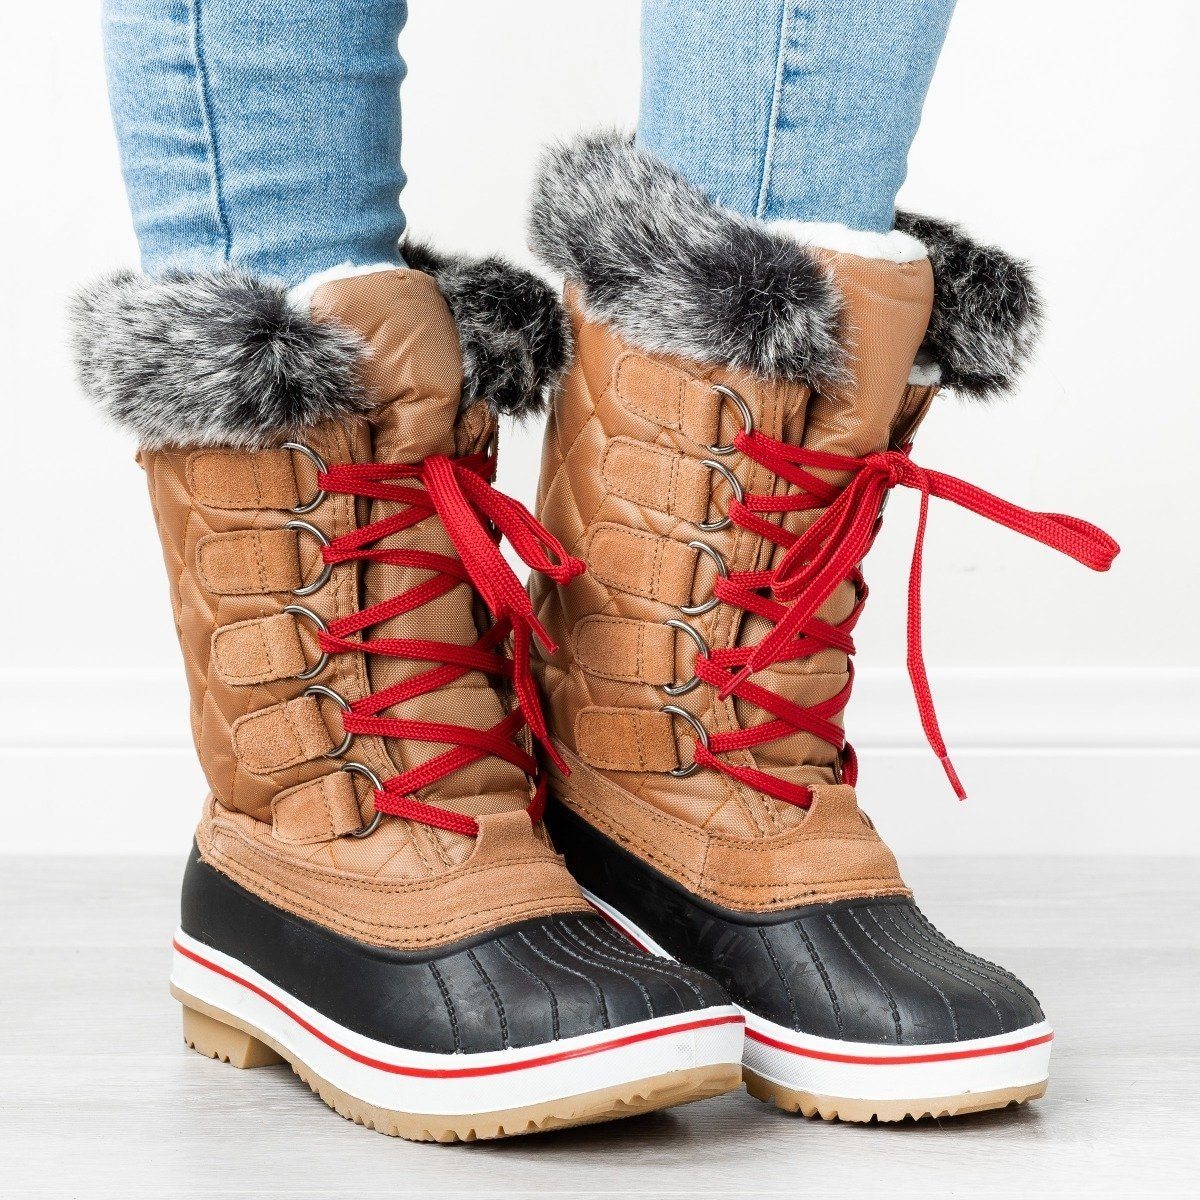 duck boots with fur top